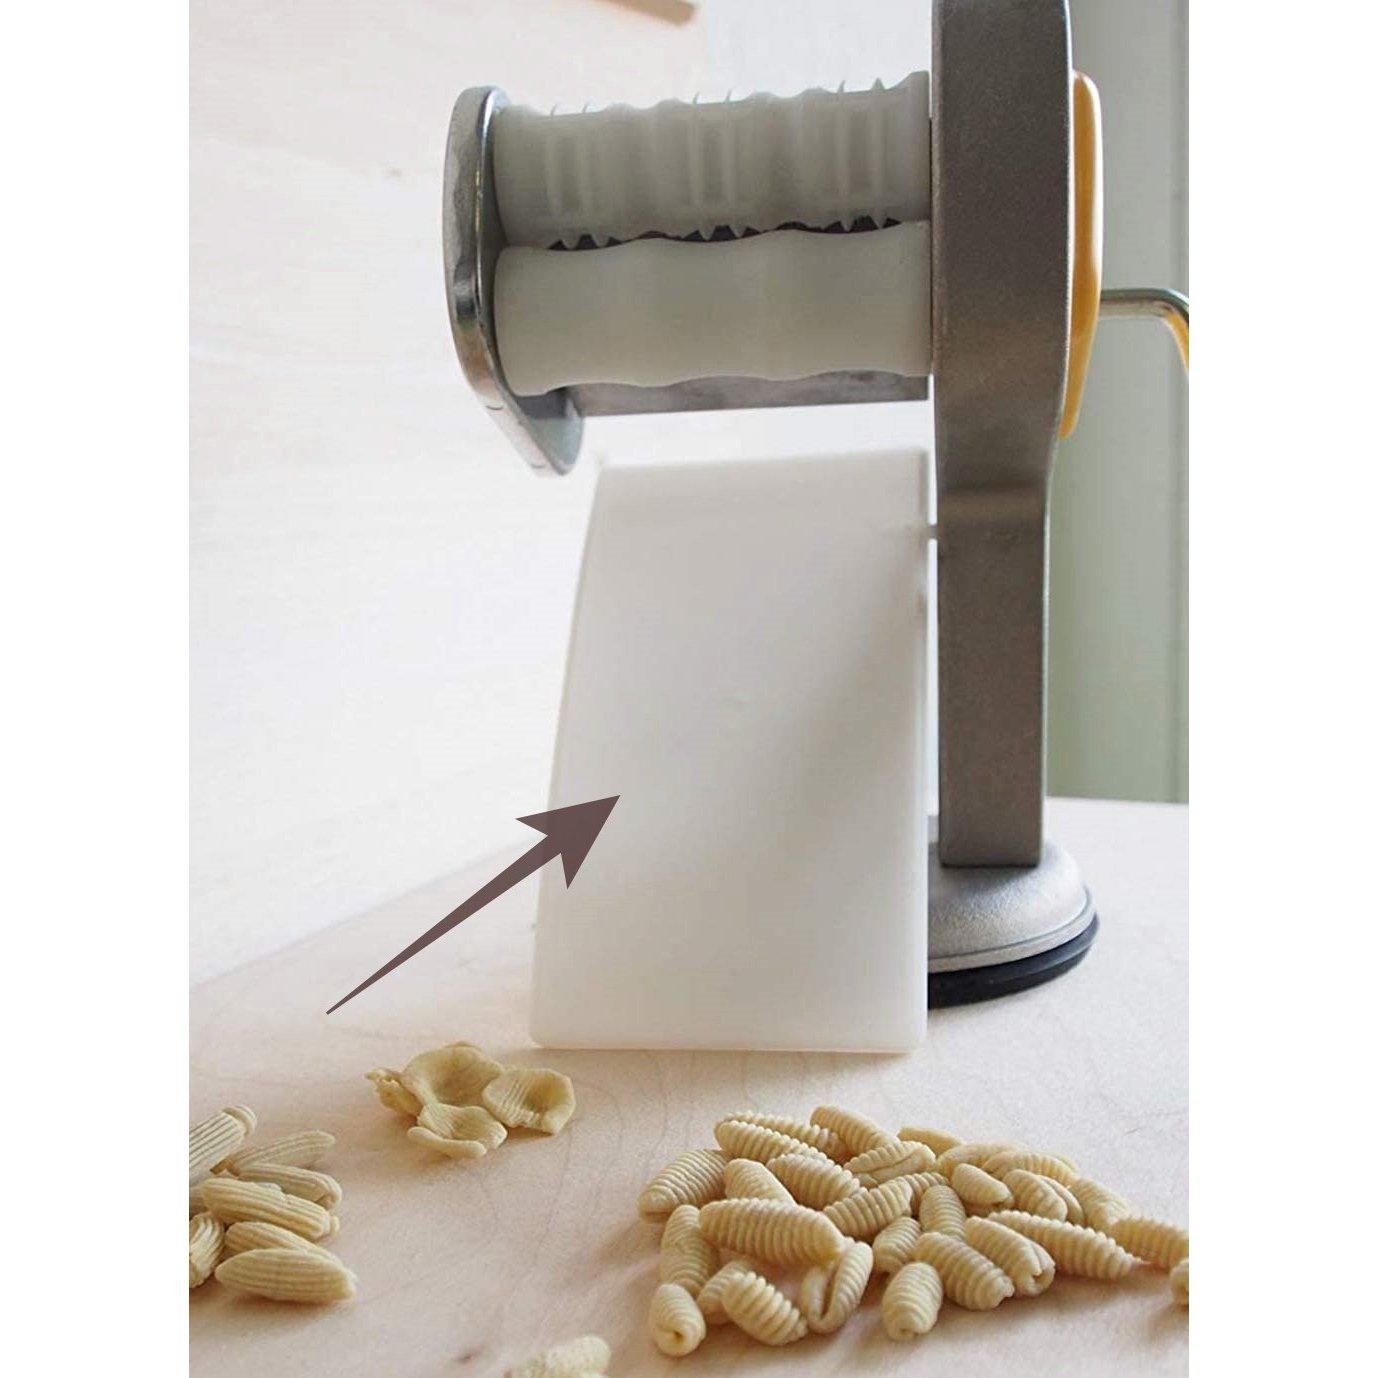 Replacement Tray/Guide for Demetra Premium Cavatelli Maker Made in Italy